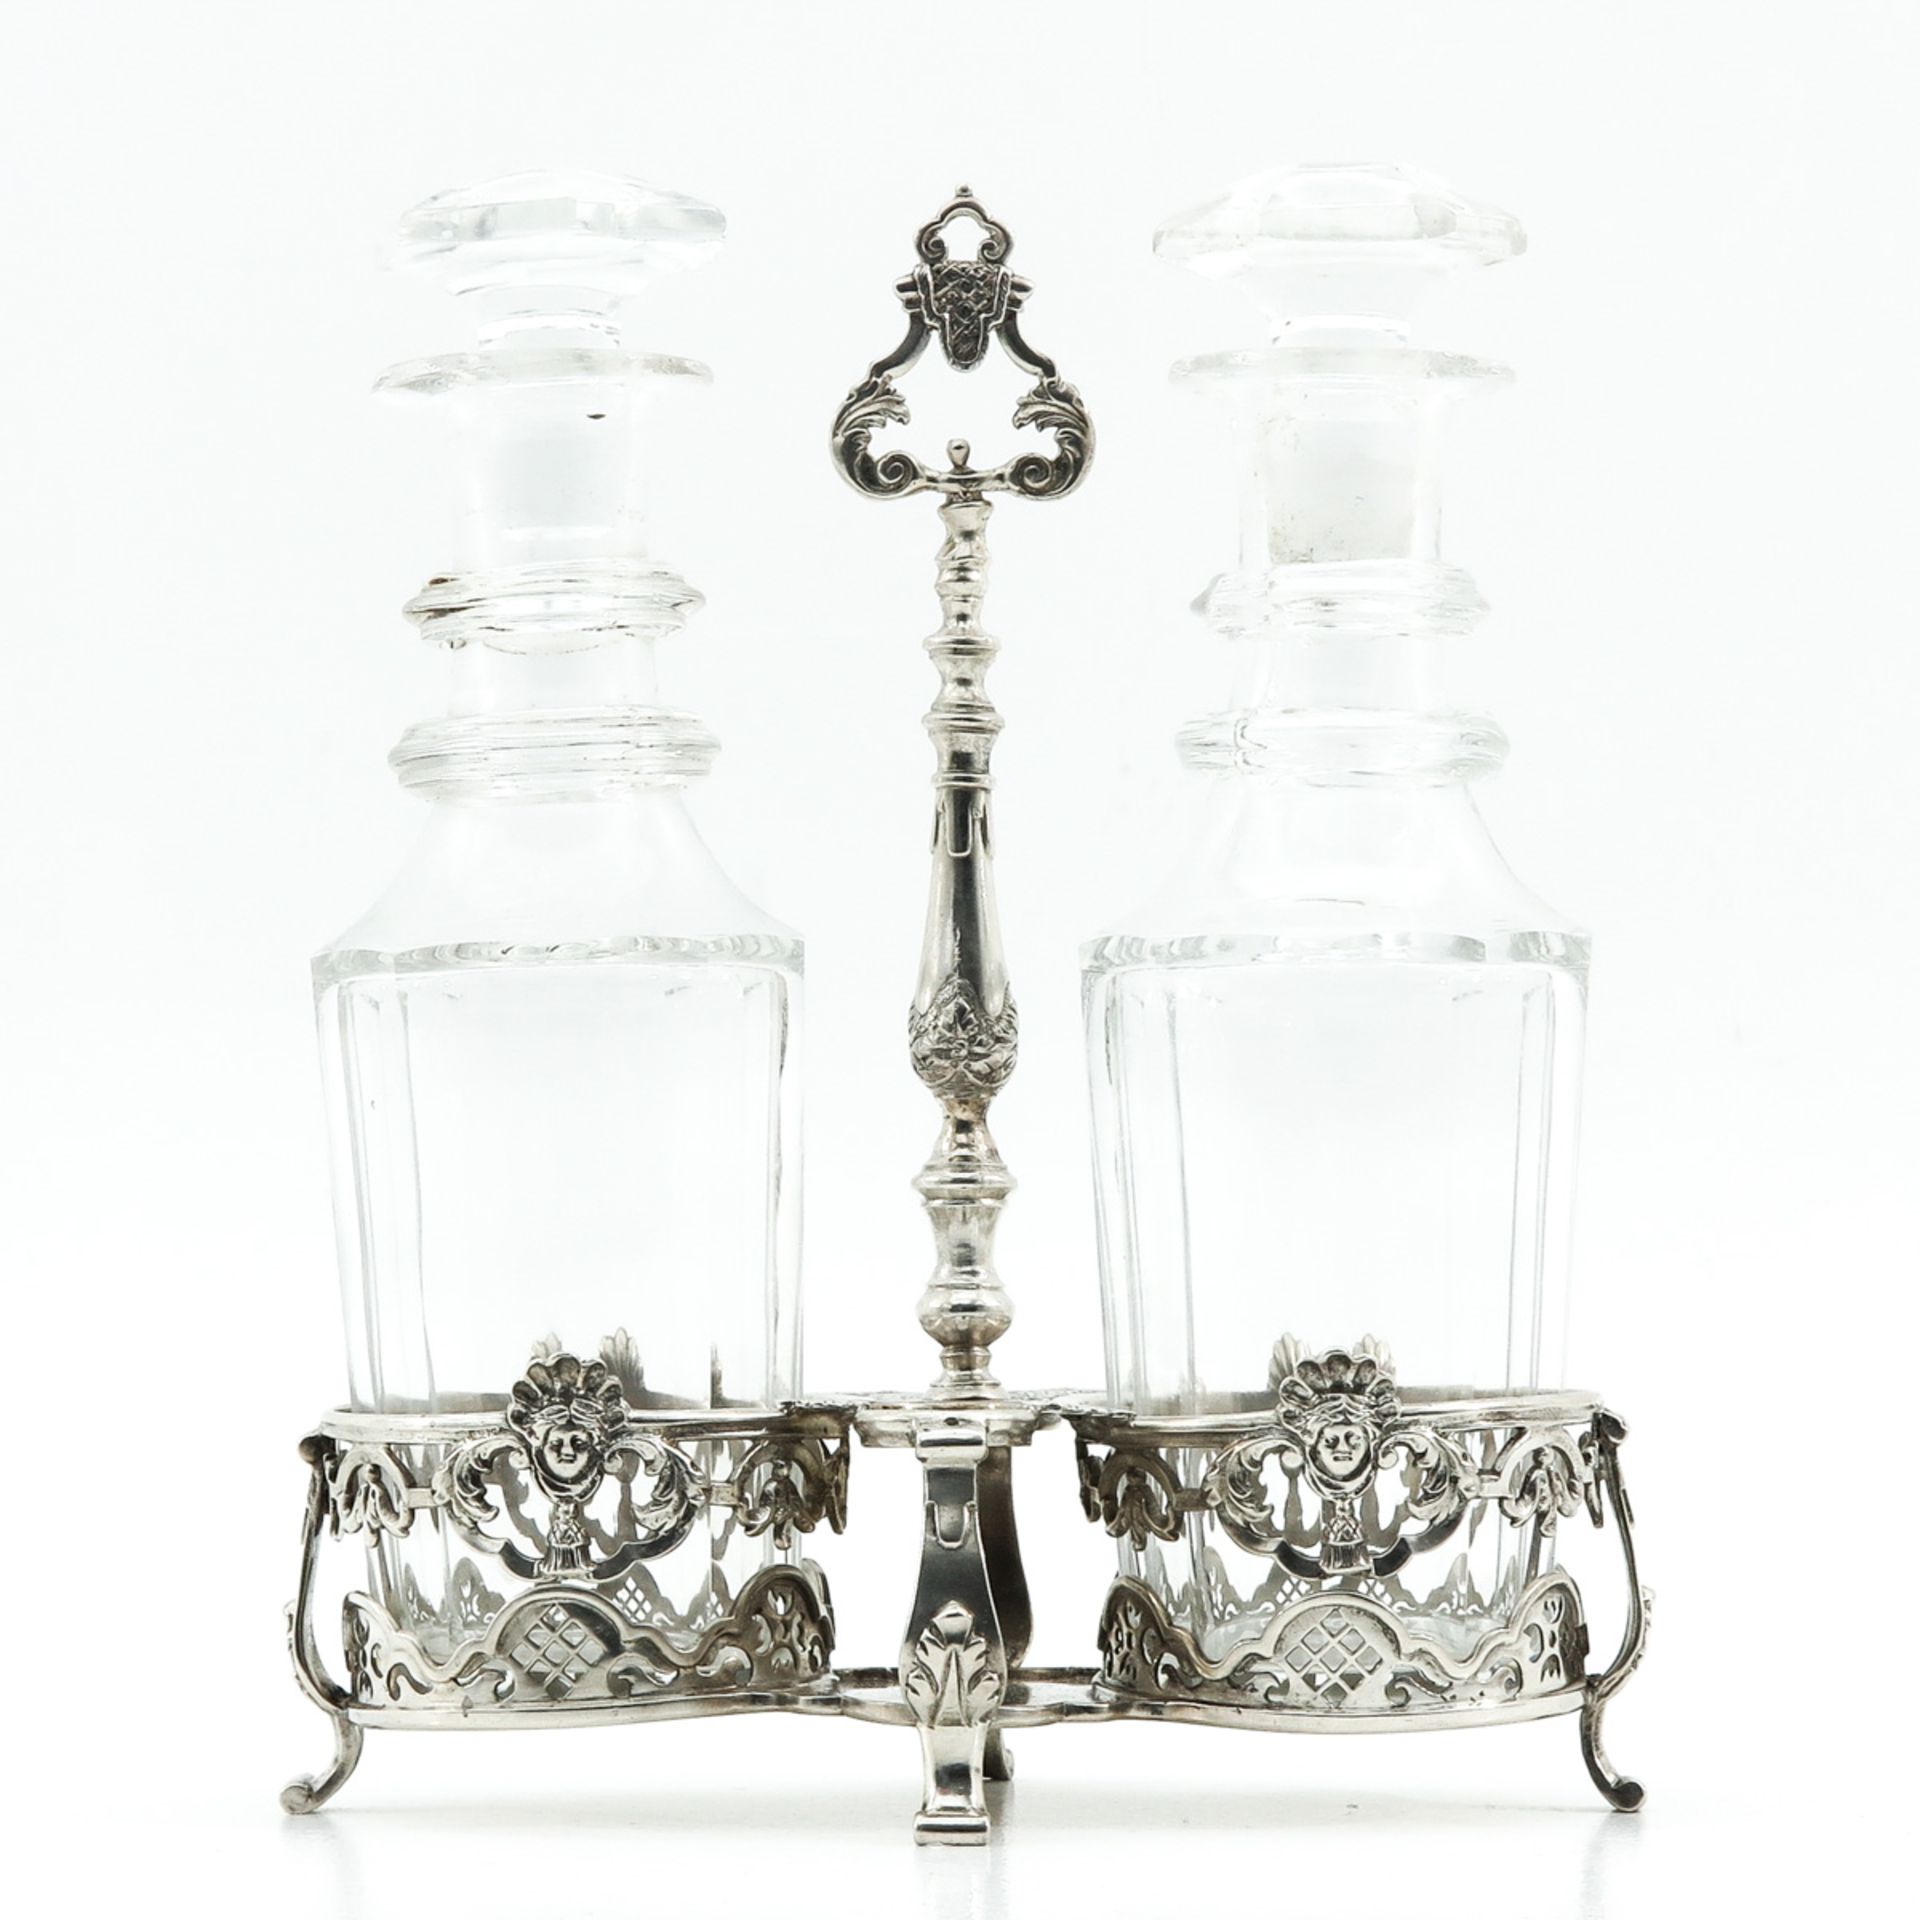 A Silver Oil and Vinegar Set - Image 3 of 10